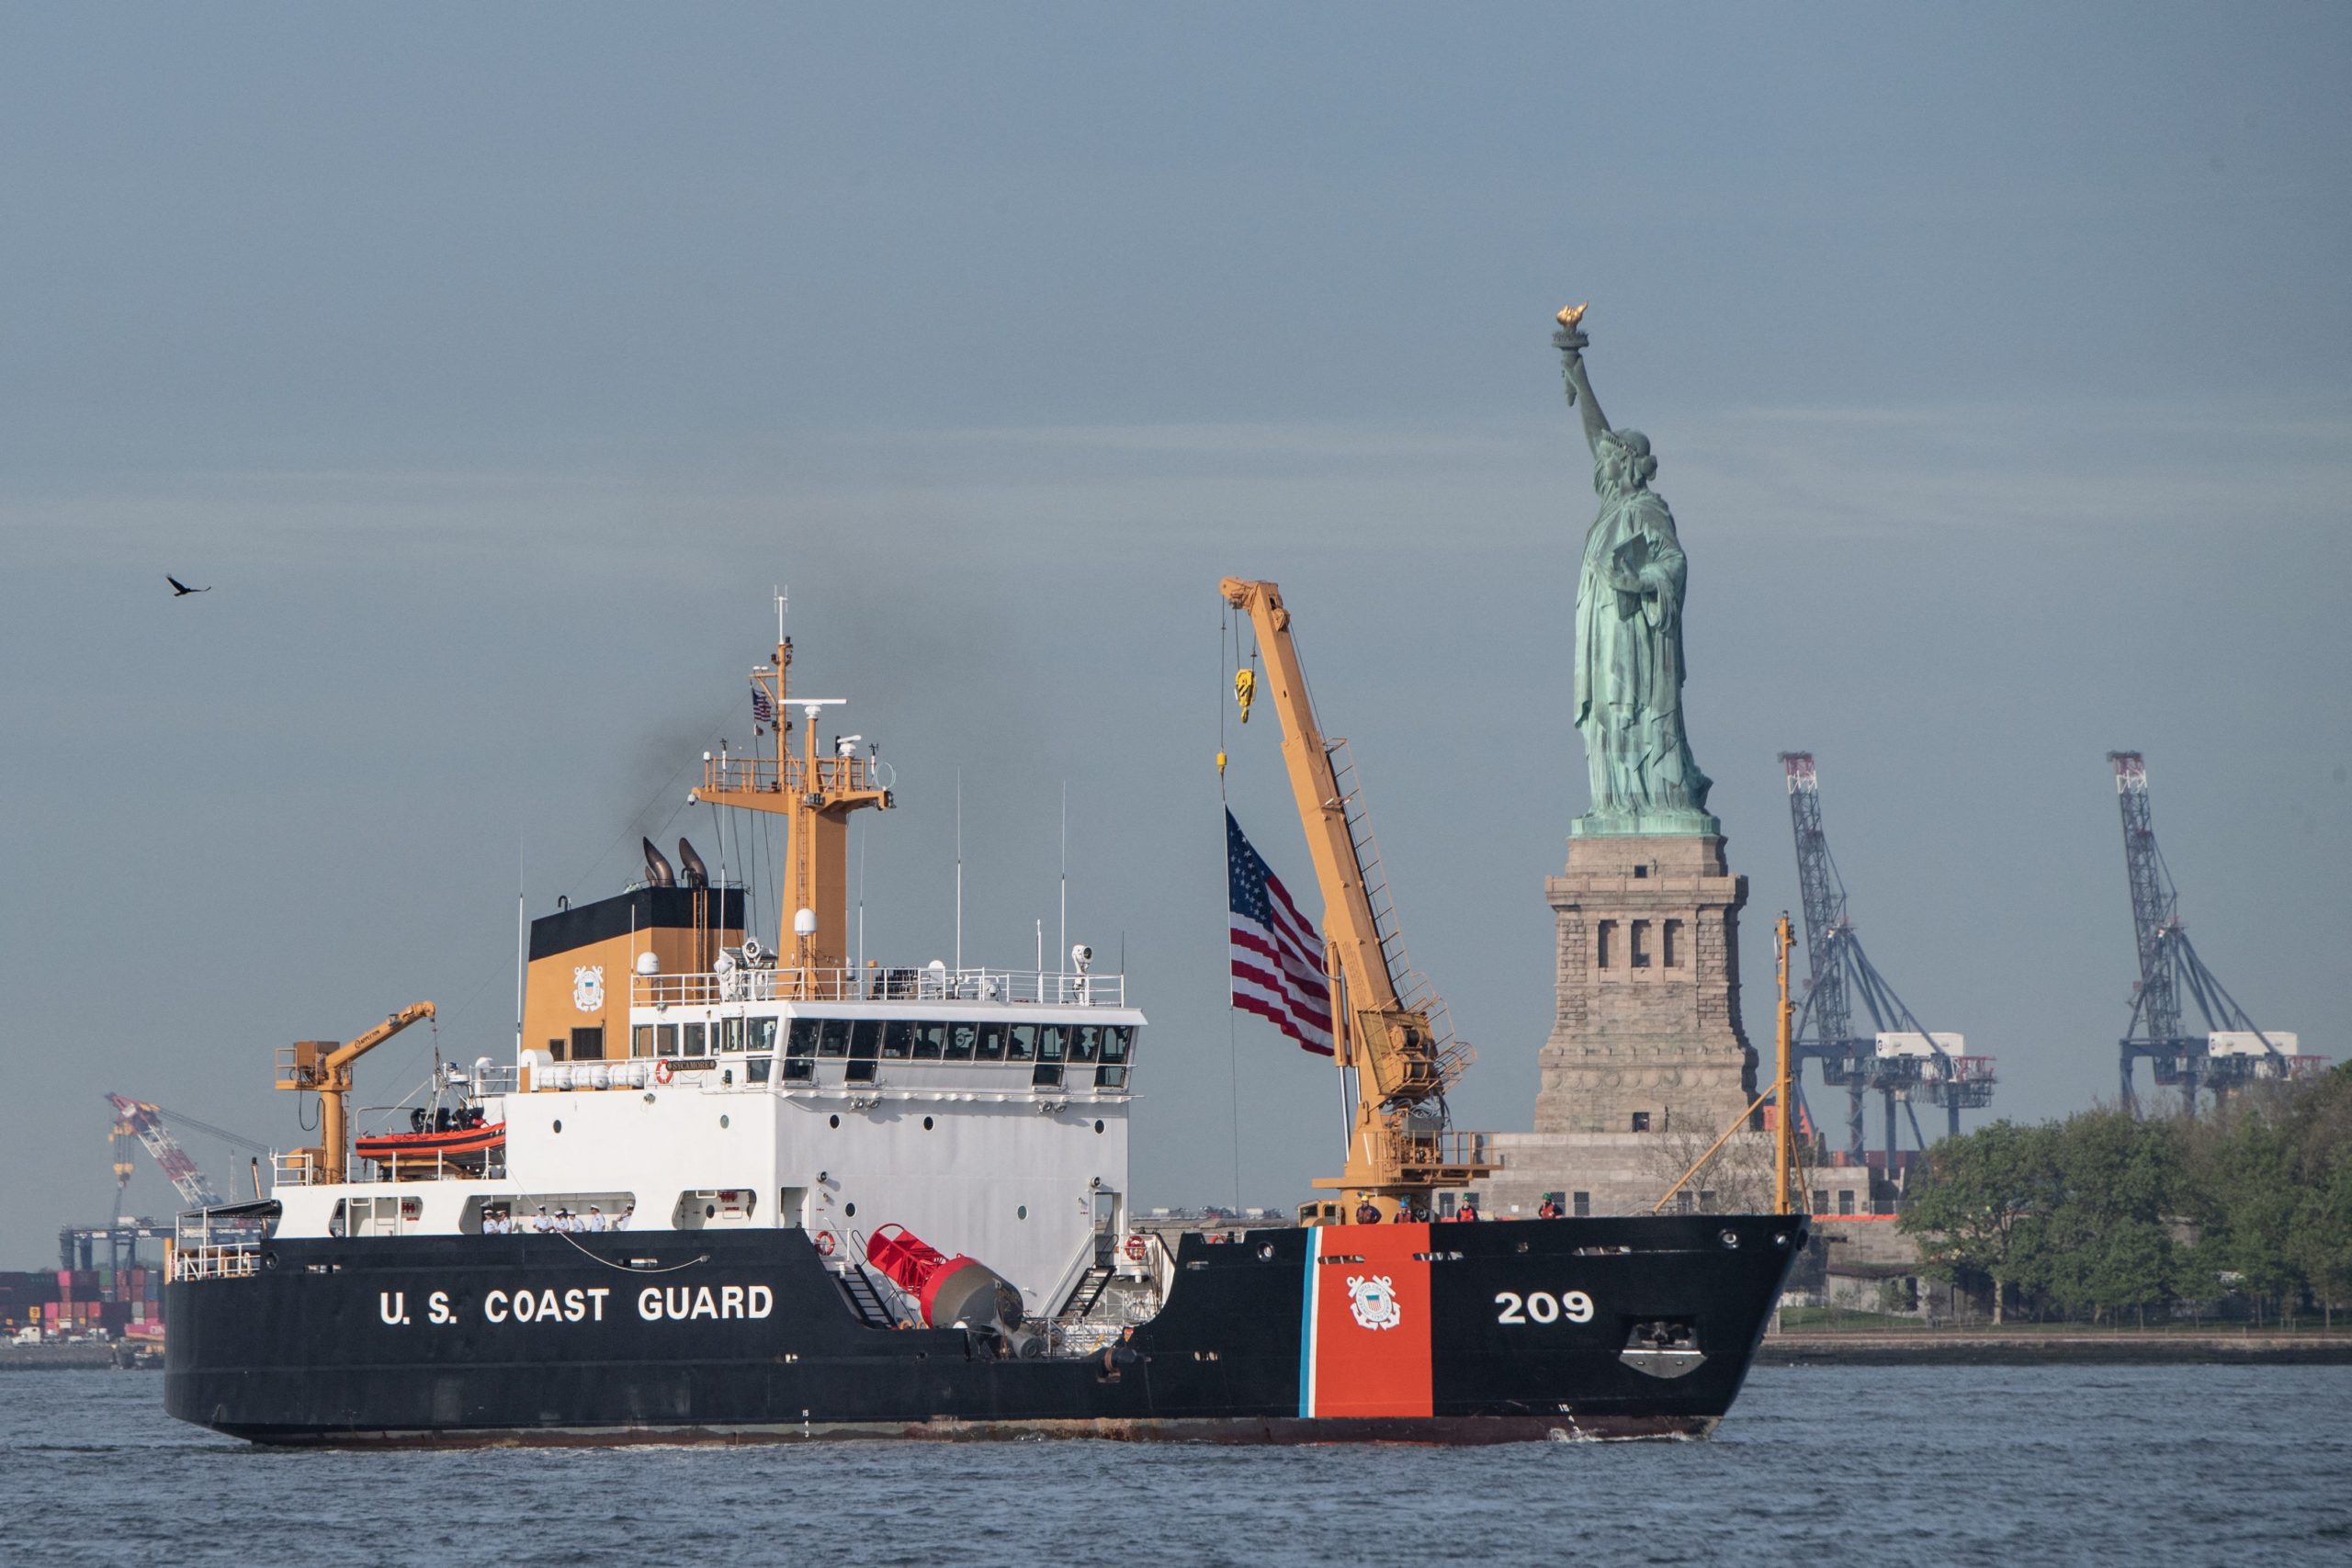 The US Coast Guard ship Sycamore arrives in New York Harbor for Fleet Week on May 25, 2022.